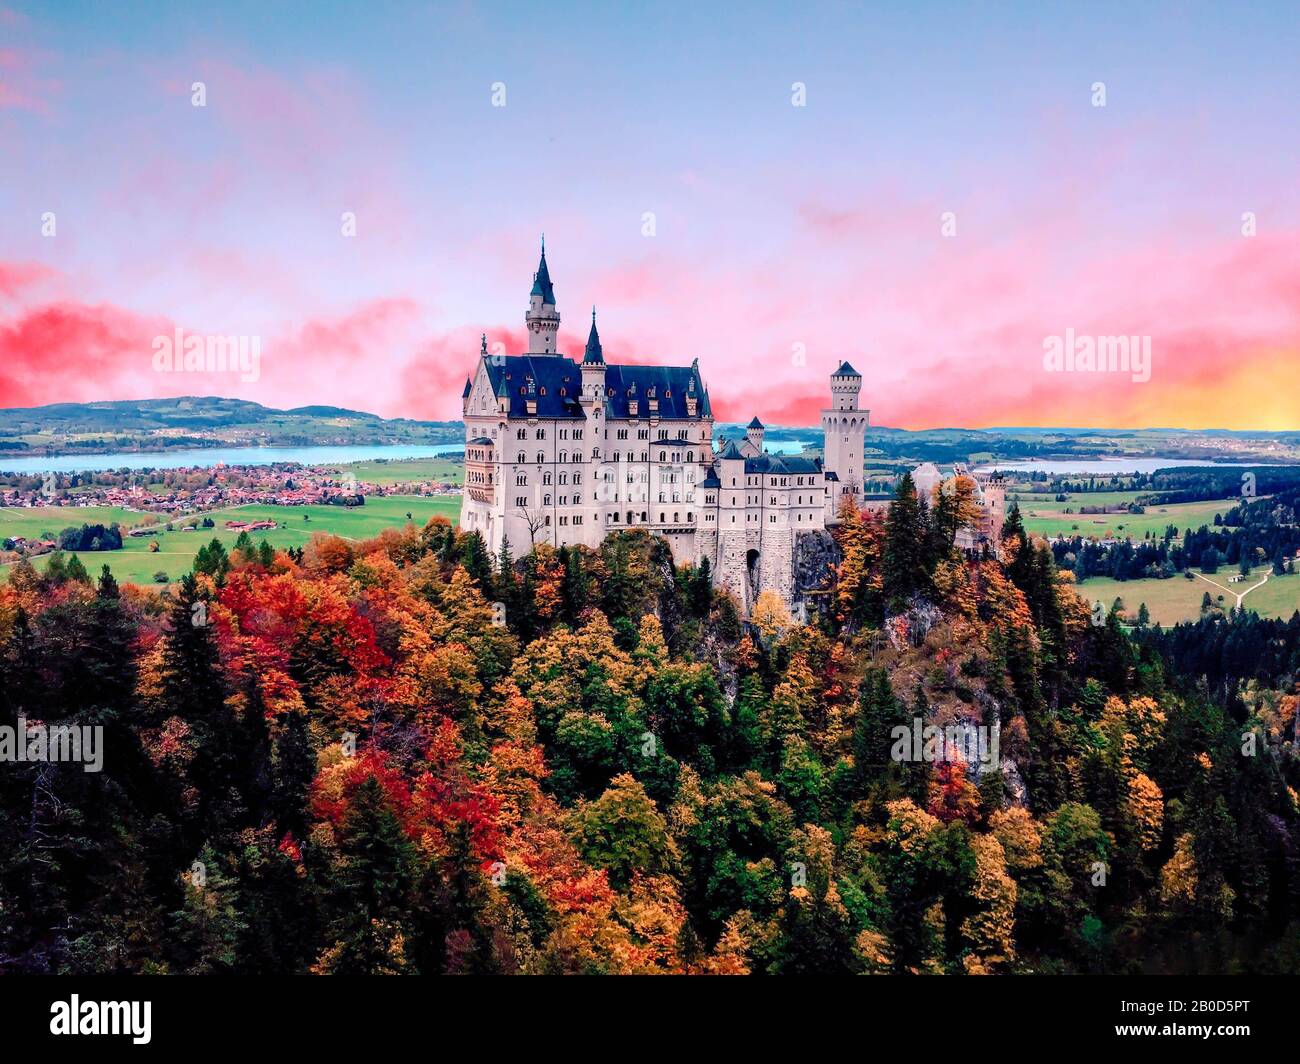 The famous Neuschwanstein castle during sunset, with colorful panorama of Mountain in the background Stock Photo